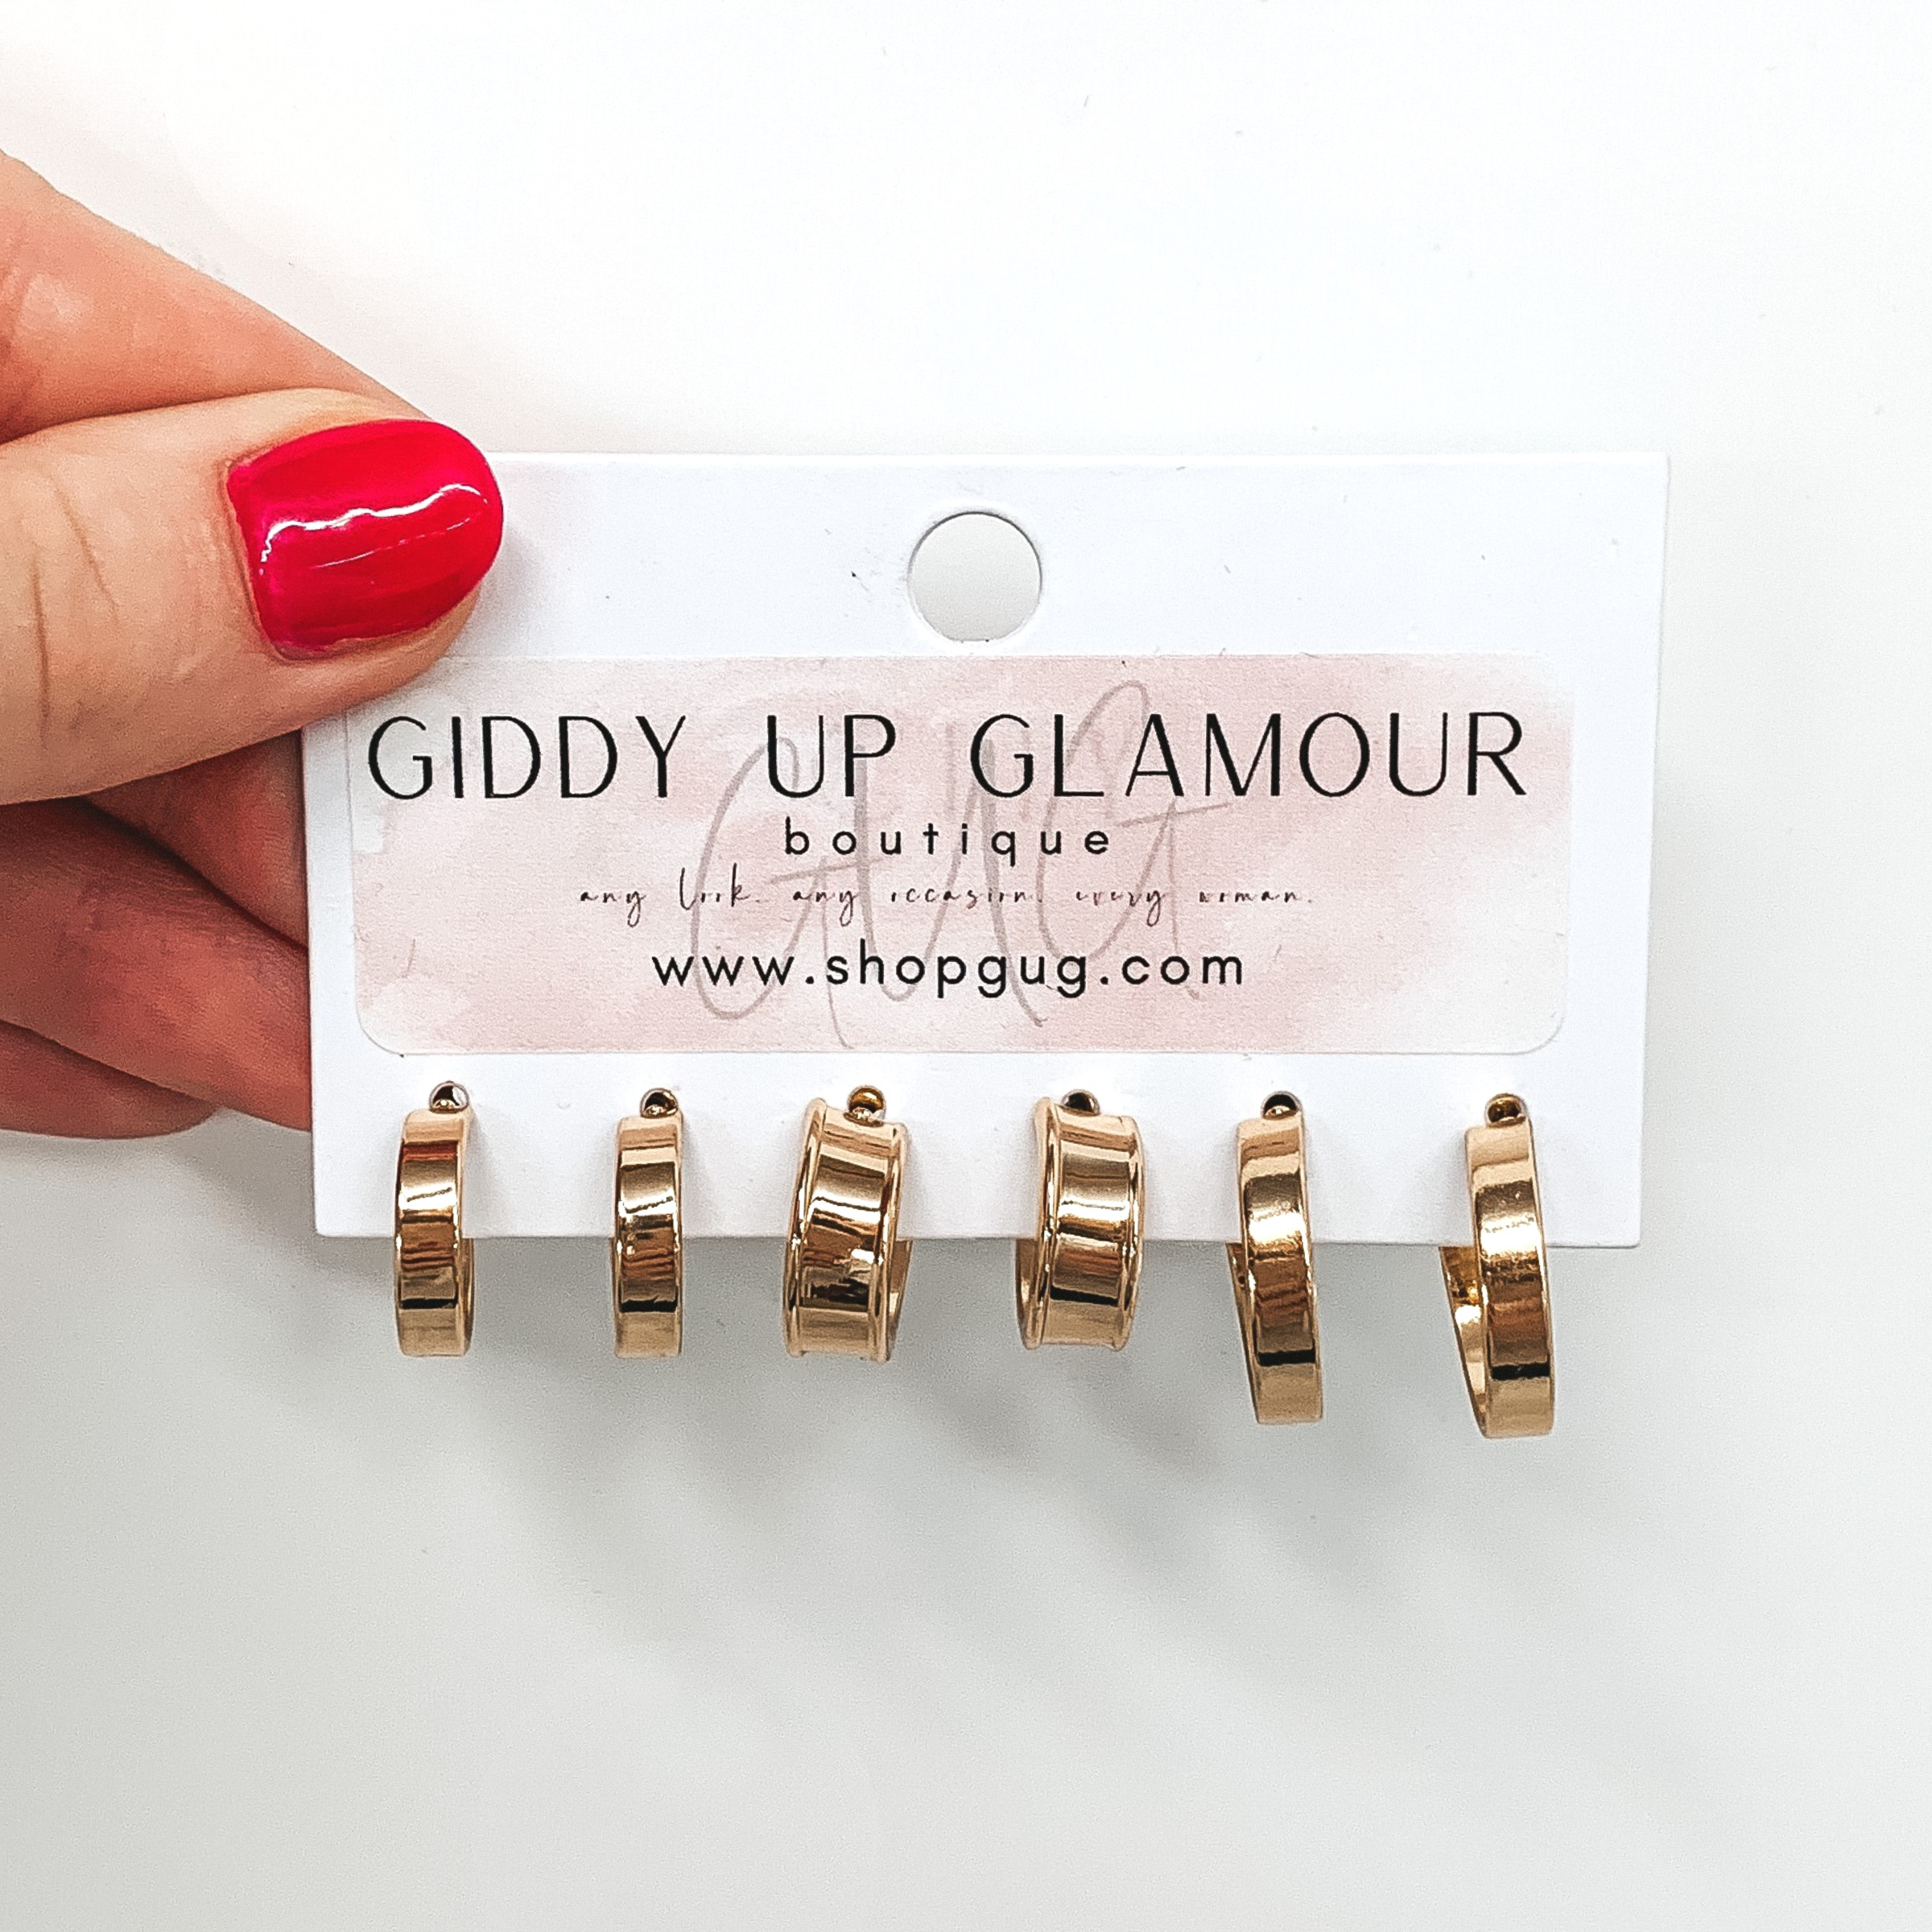 Trendy Hoops Earring Set in Gold - Giddy Up Glamour Boutique